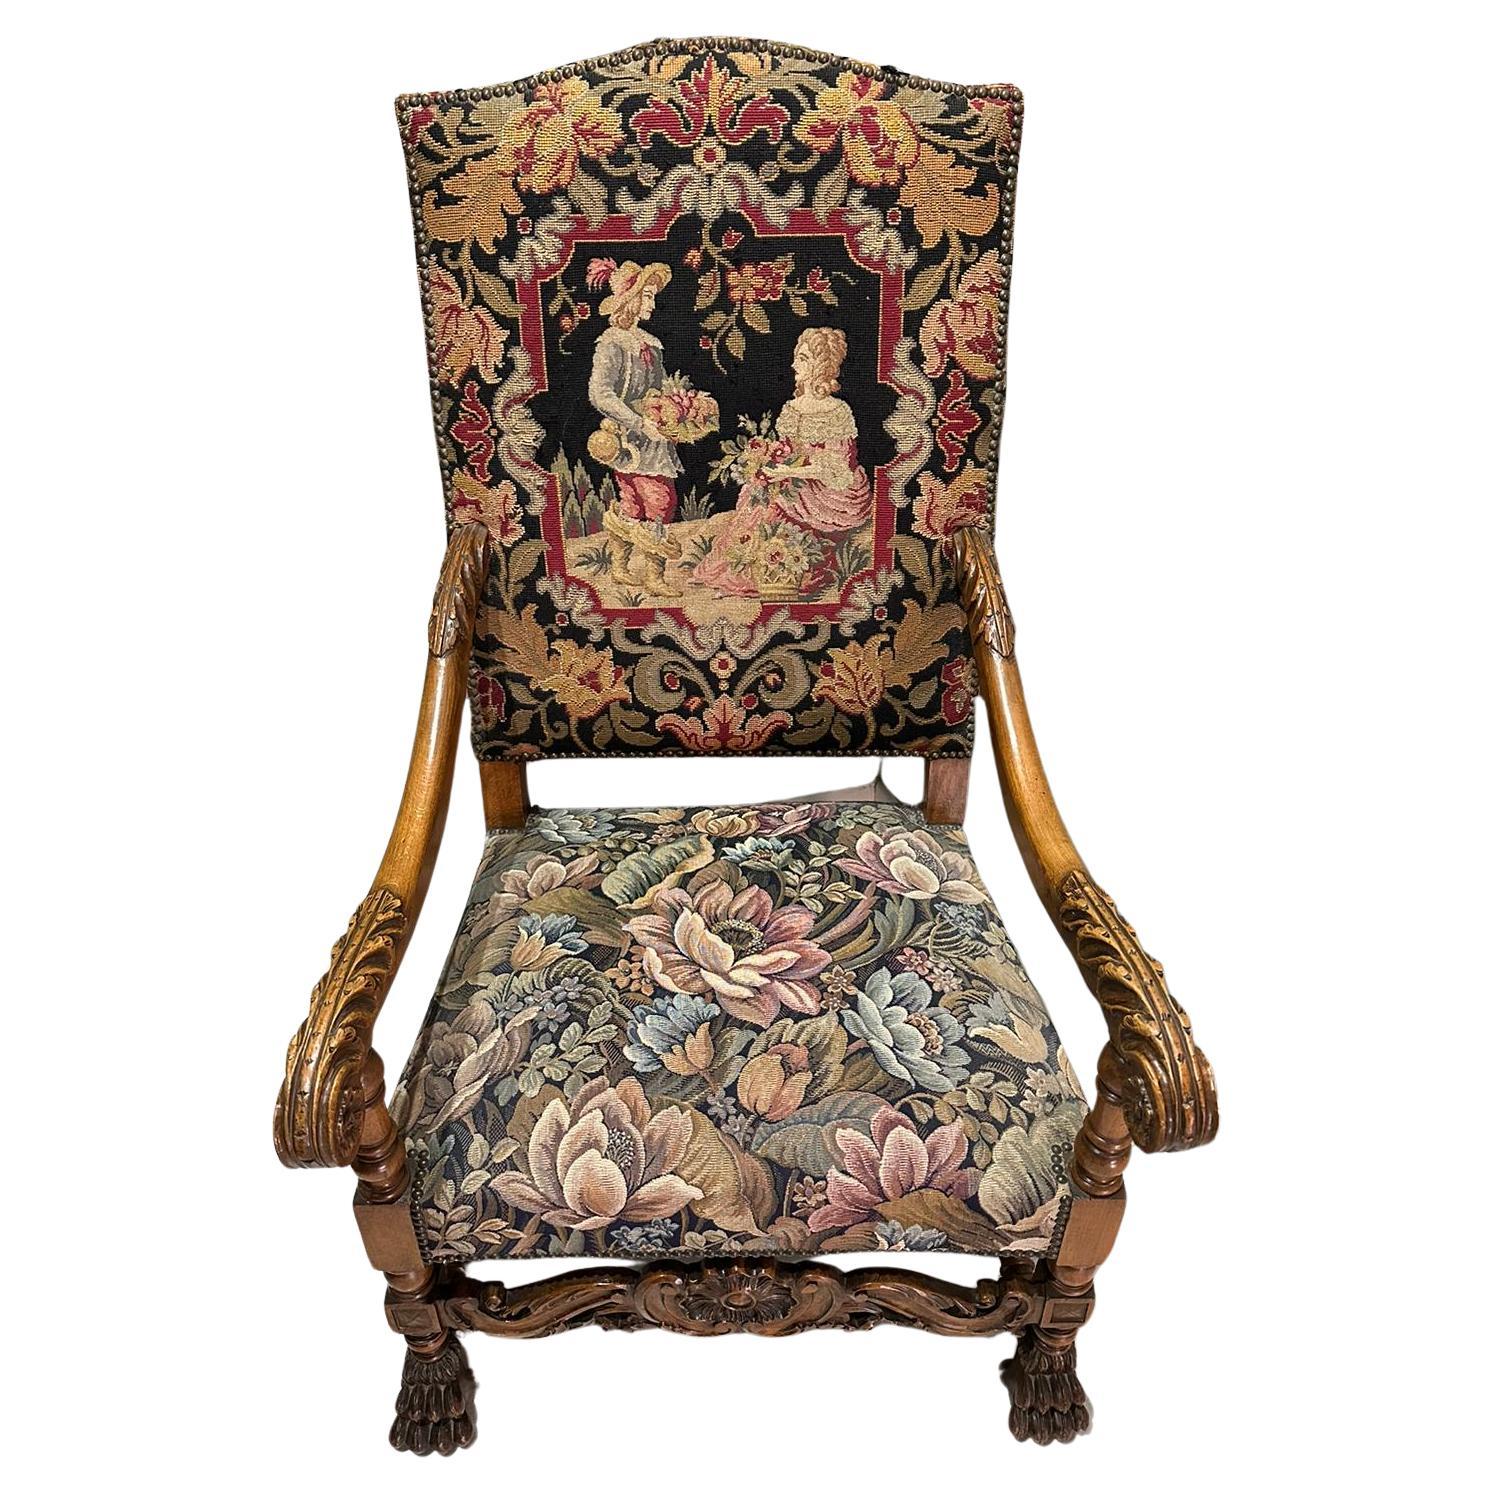 Rare Portuguese Chair 18th Century Rosewood with VIDEO For Sale